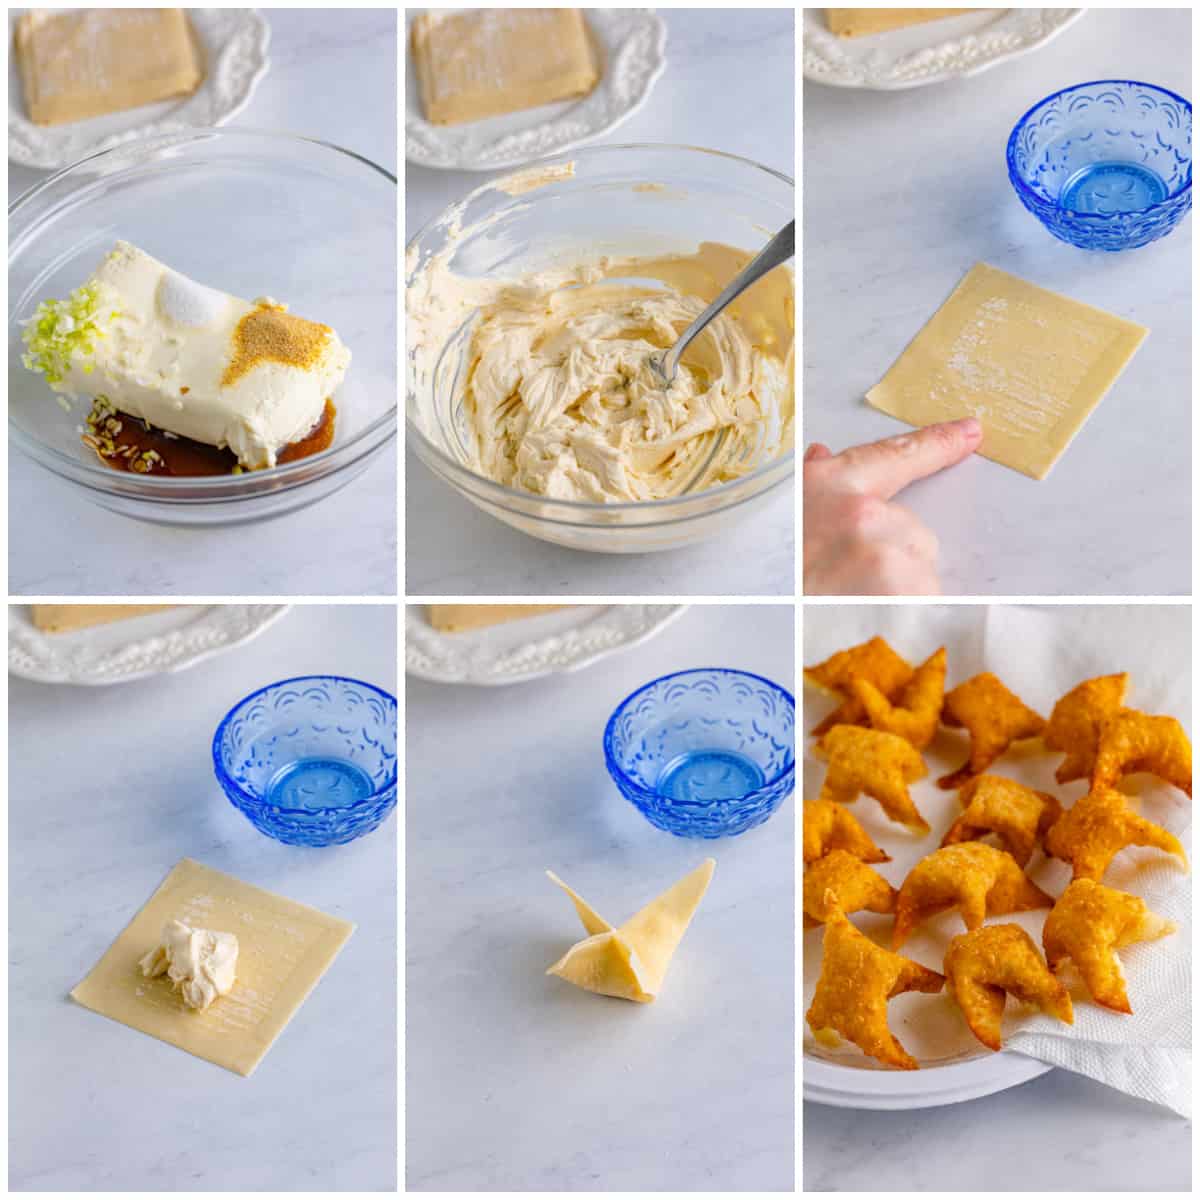 Step by step photos on how to make Cream Cheese Wontons.